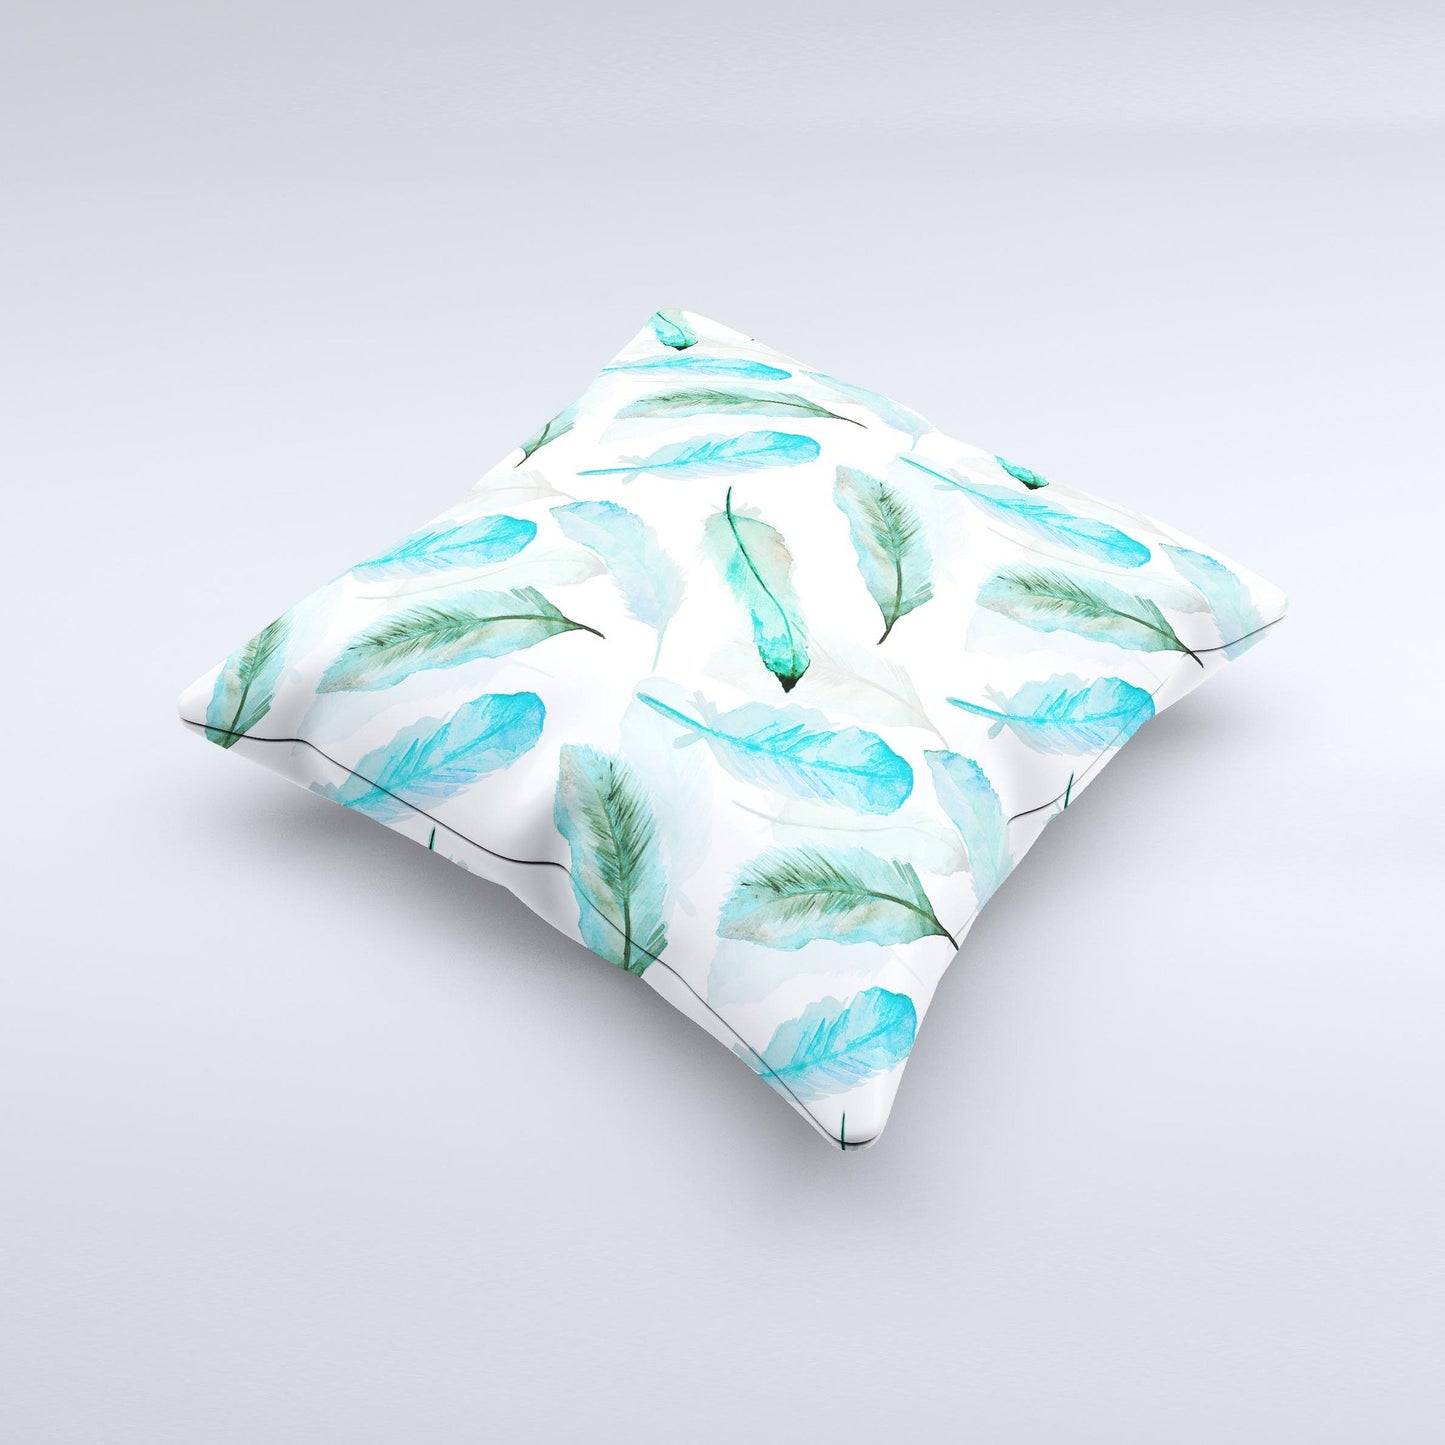 The Feathery Watercolor ink-Fuzed Decorative Throw Pillow